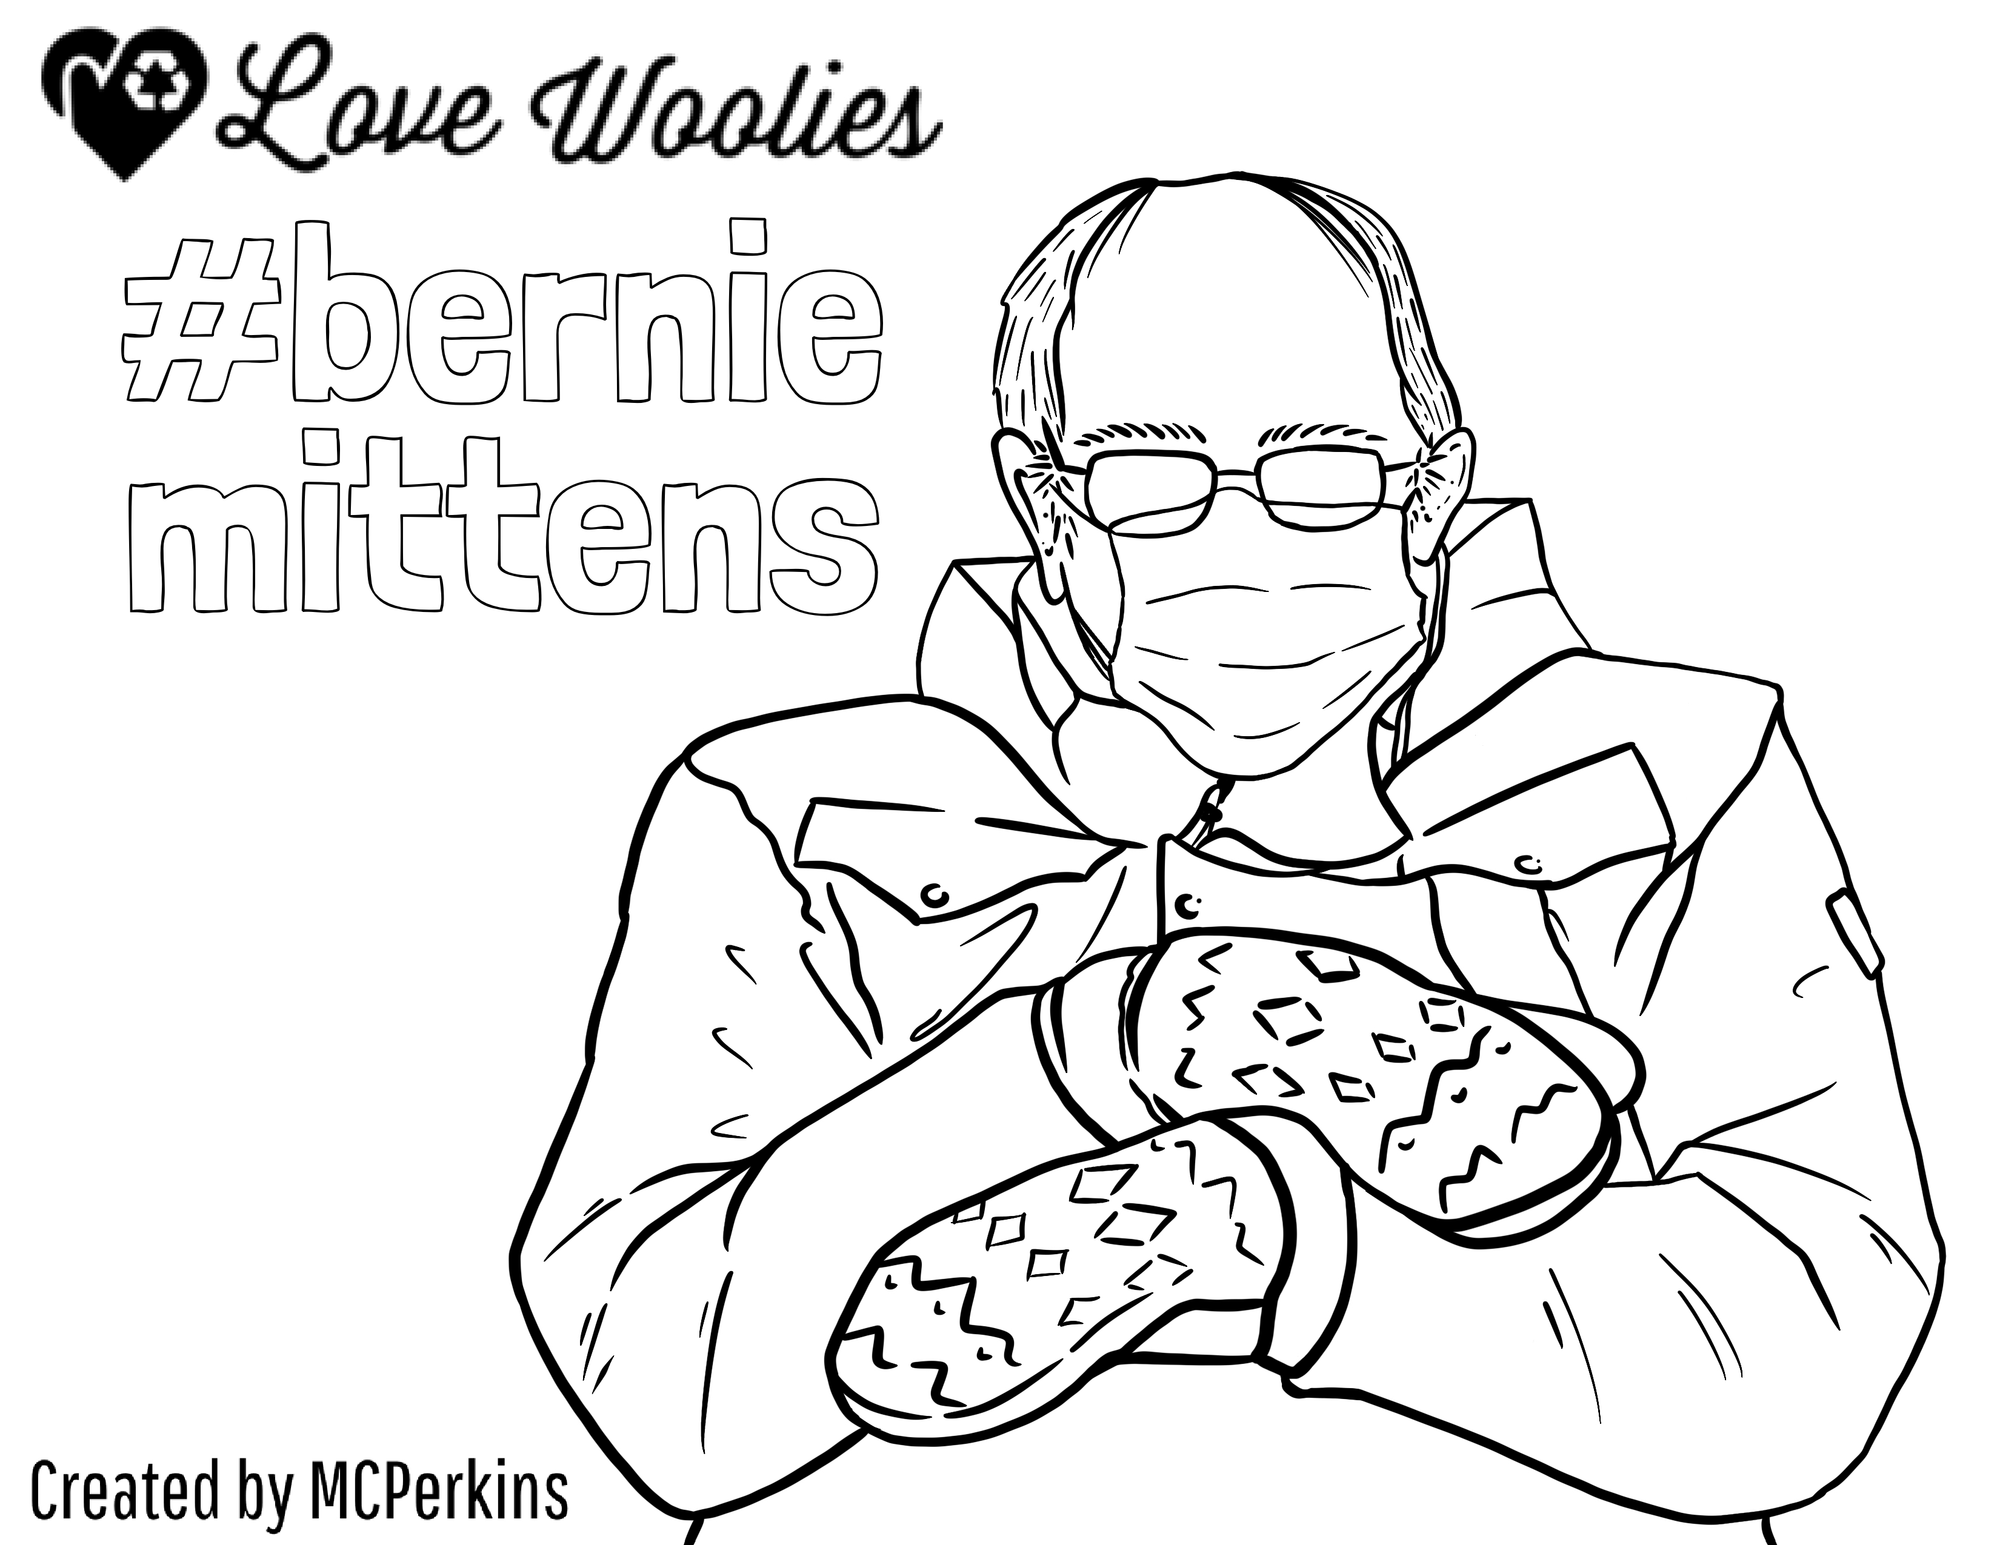 #BernieMittens Coloring Pages!